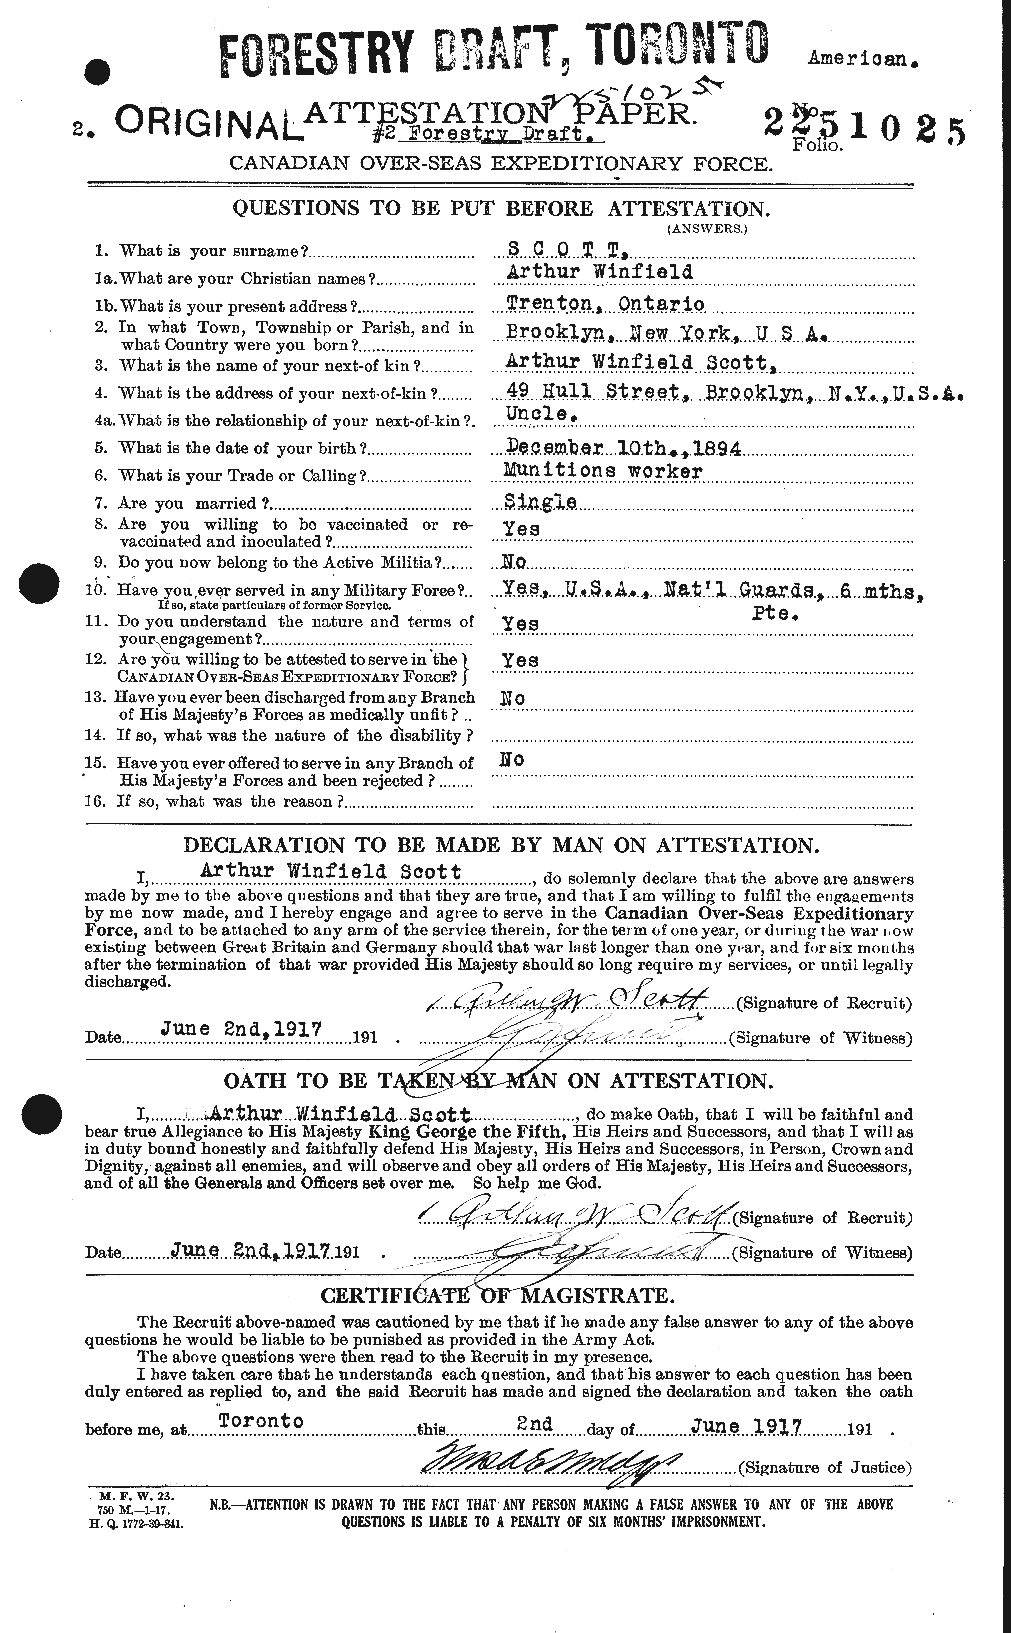 Personnel Records of the First World War - CEF 086227a